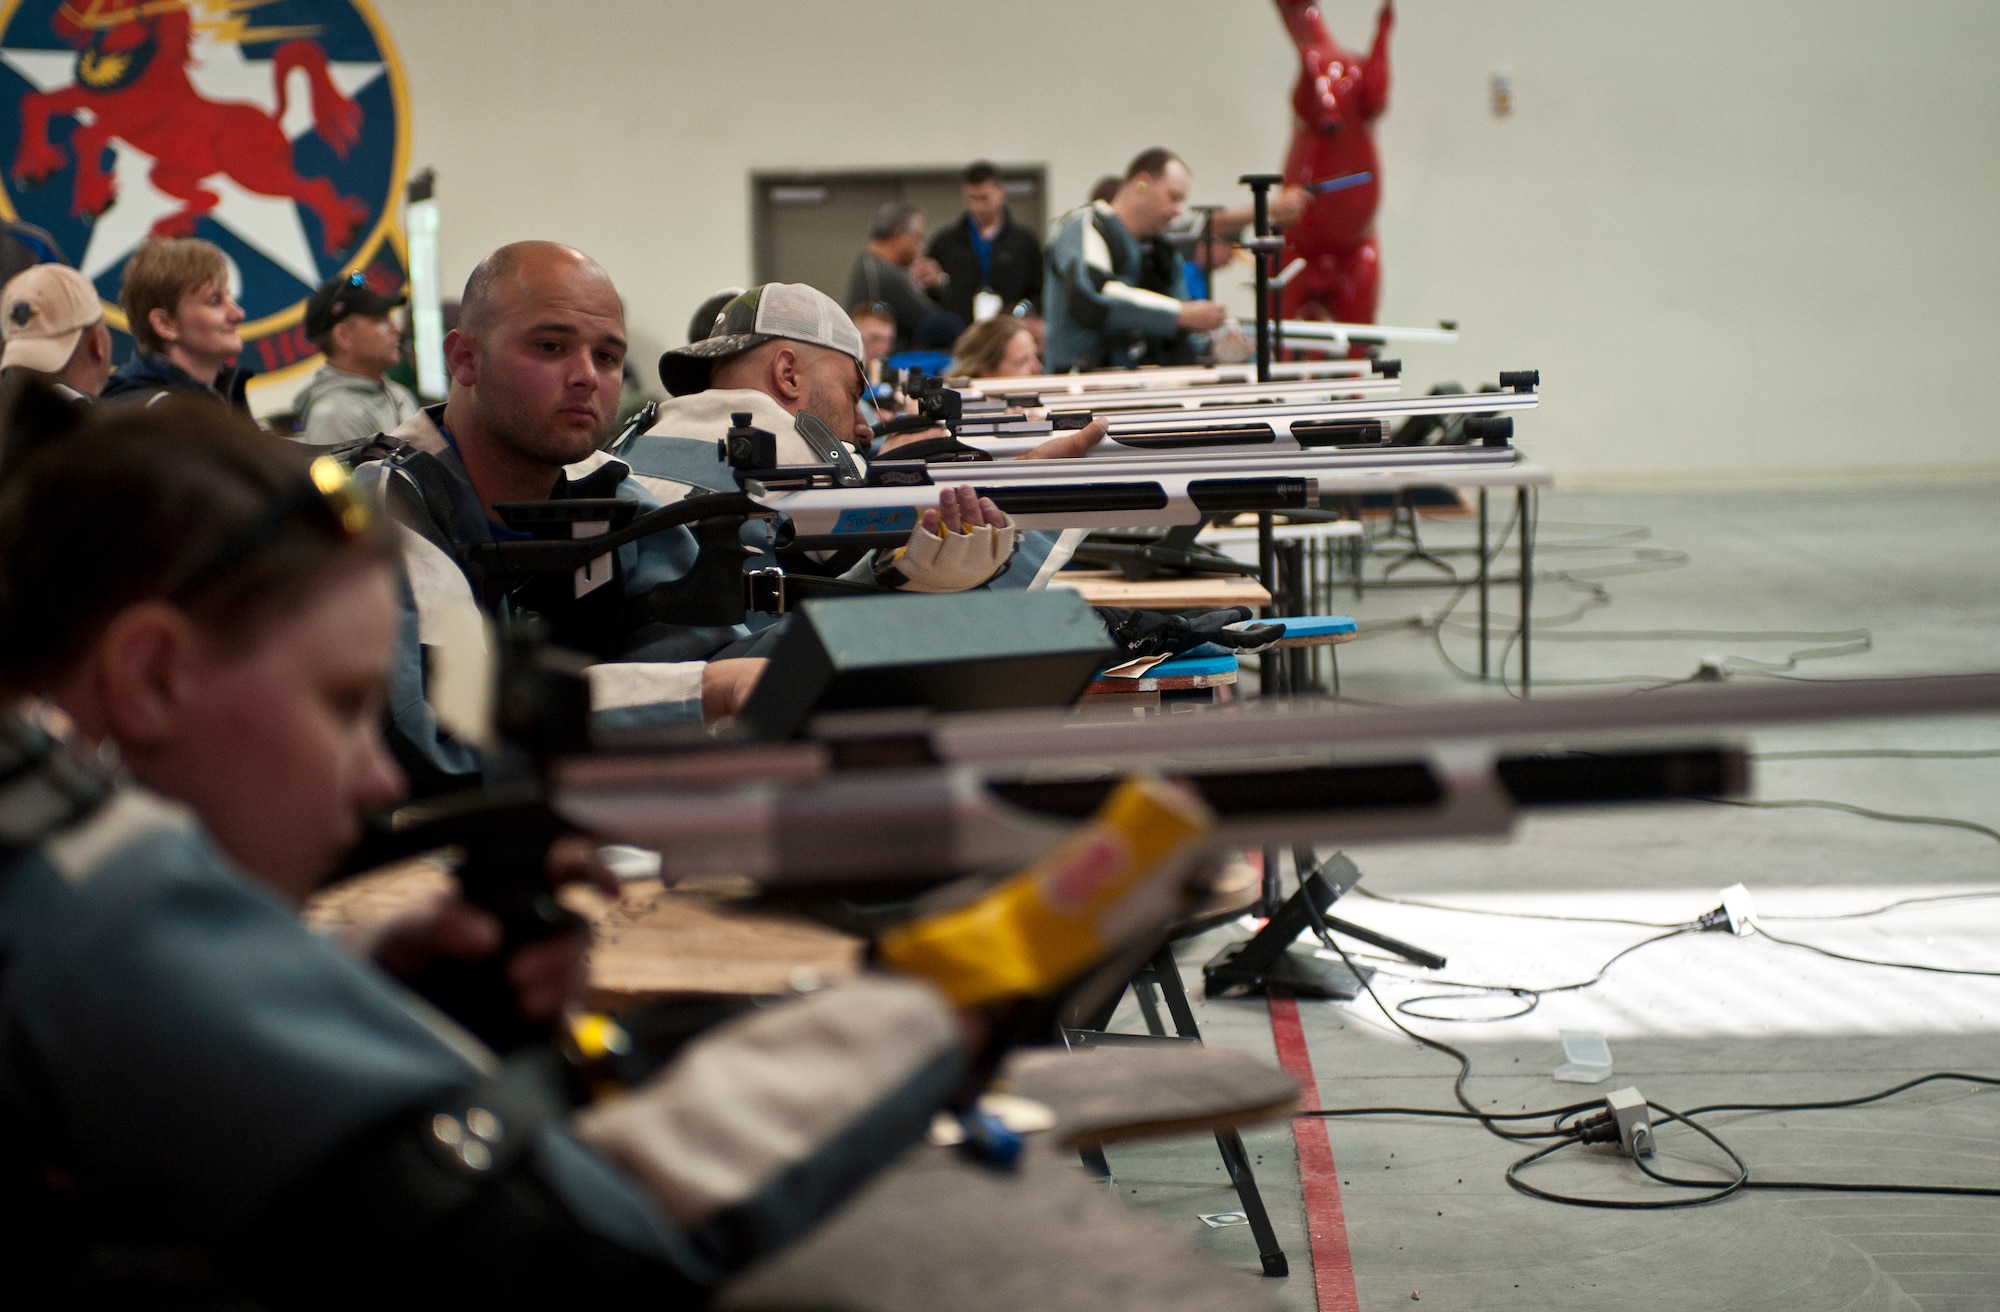 Participants in the 2015 U.S. Air Force Trials shoot at targets during the rifle shooting preliminary competition at Nellis Air Force Base, Nev., March 3, 2015. The Air Force Trials are an adaptive sports event designed to promote the mental and physical well-being of seriously ill and injured military members and veterans. (U.S. Air Force photo by Staff Sgt. Siuta B. Ika)